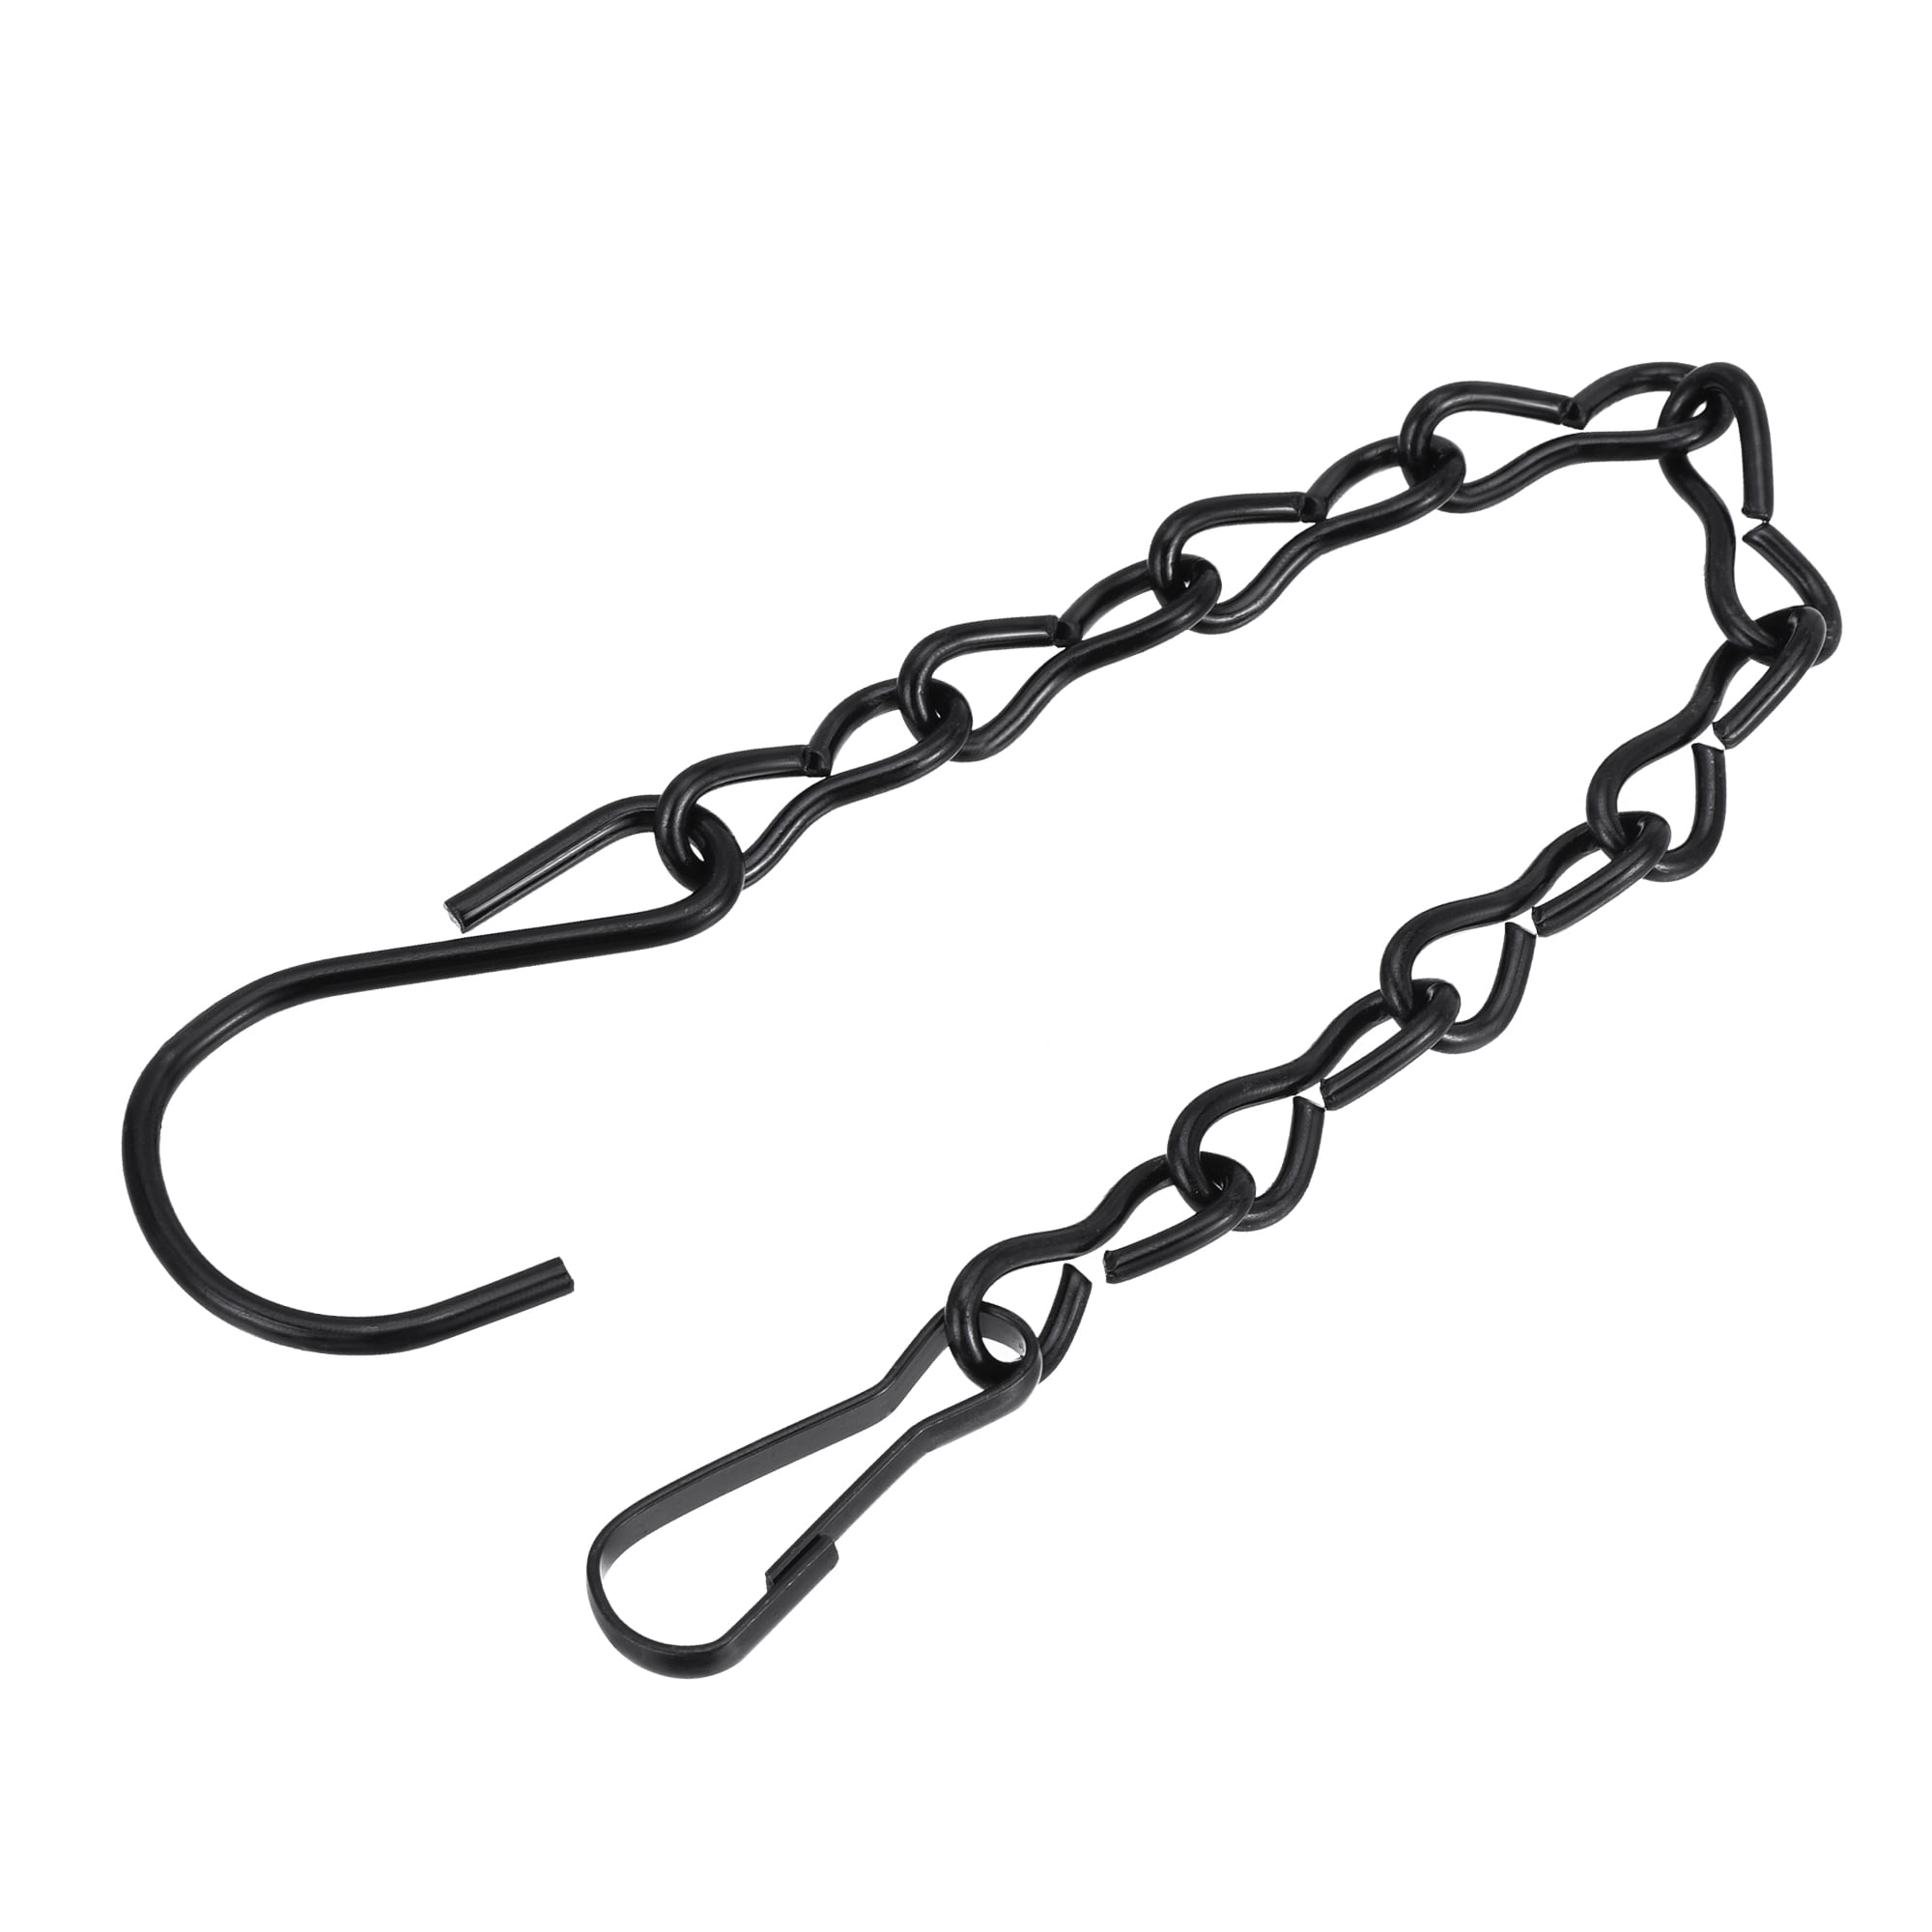 Uxcell 24cm Extension Lighting Chain S Hook Hanging Chains Black 6 Pack 